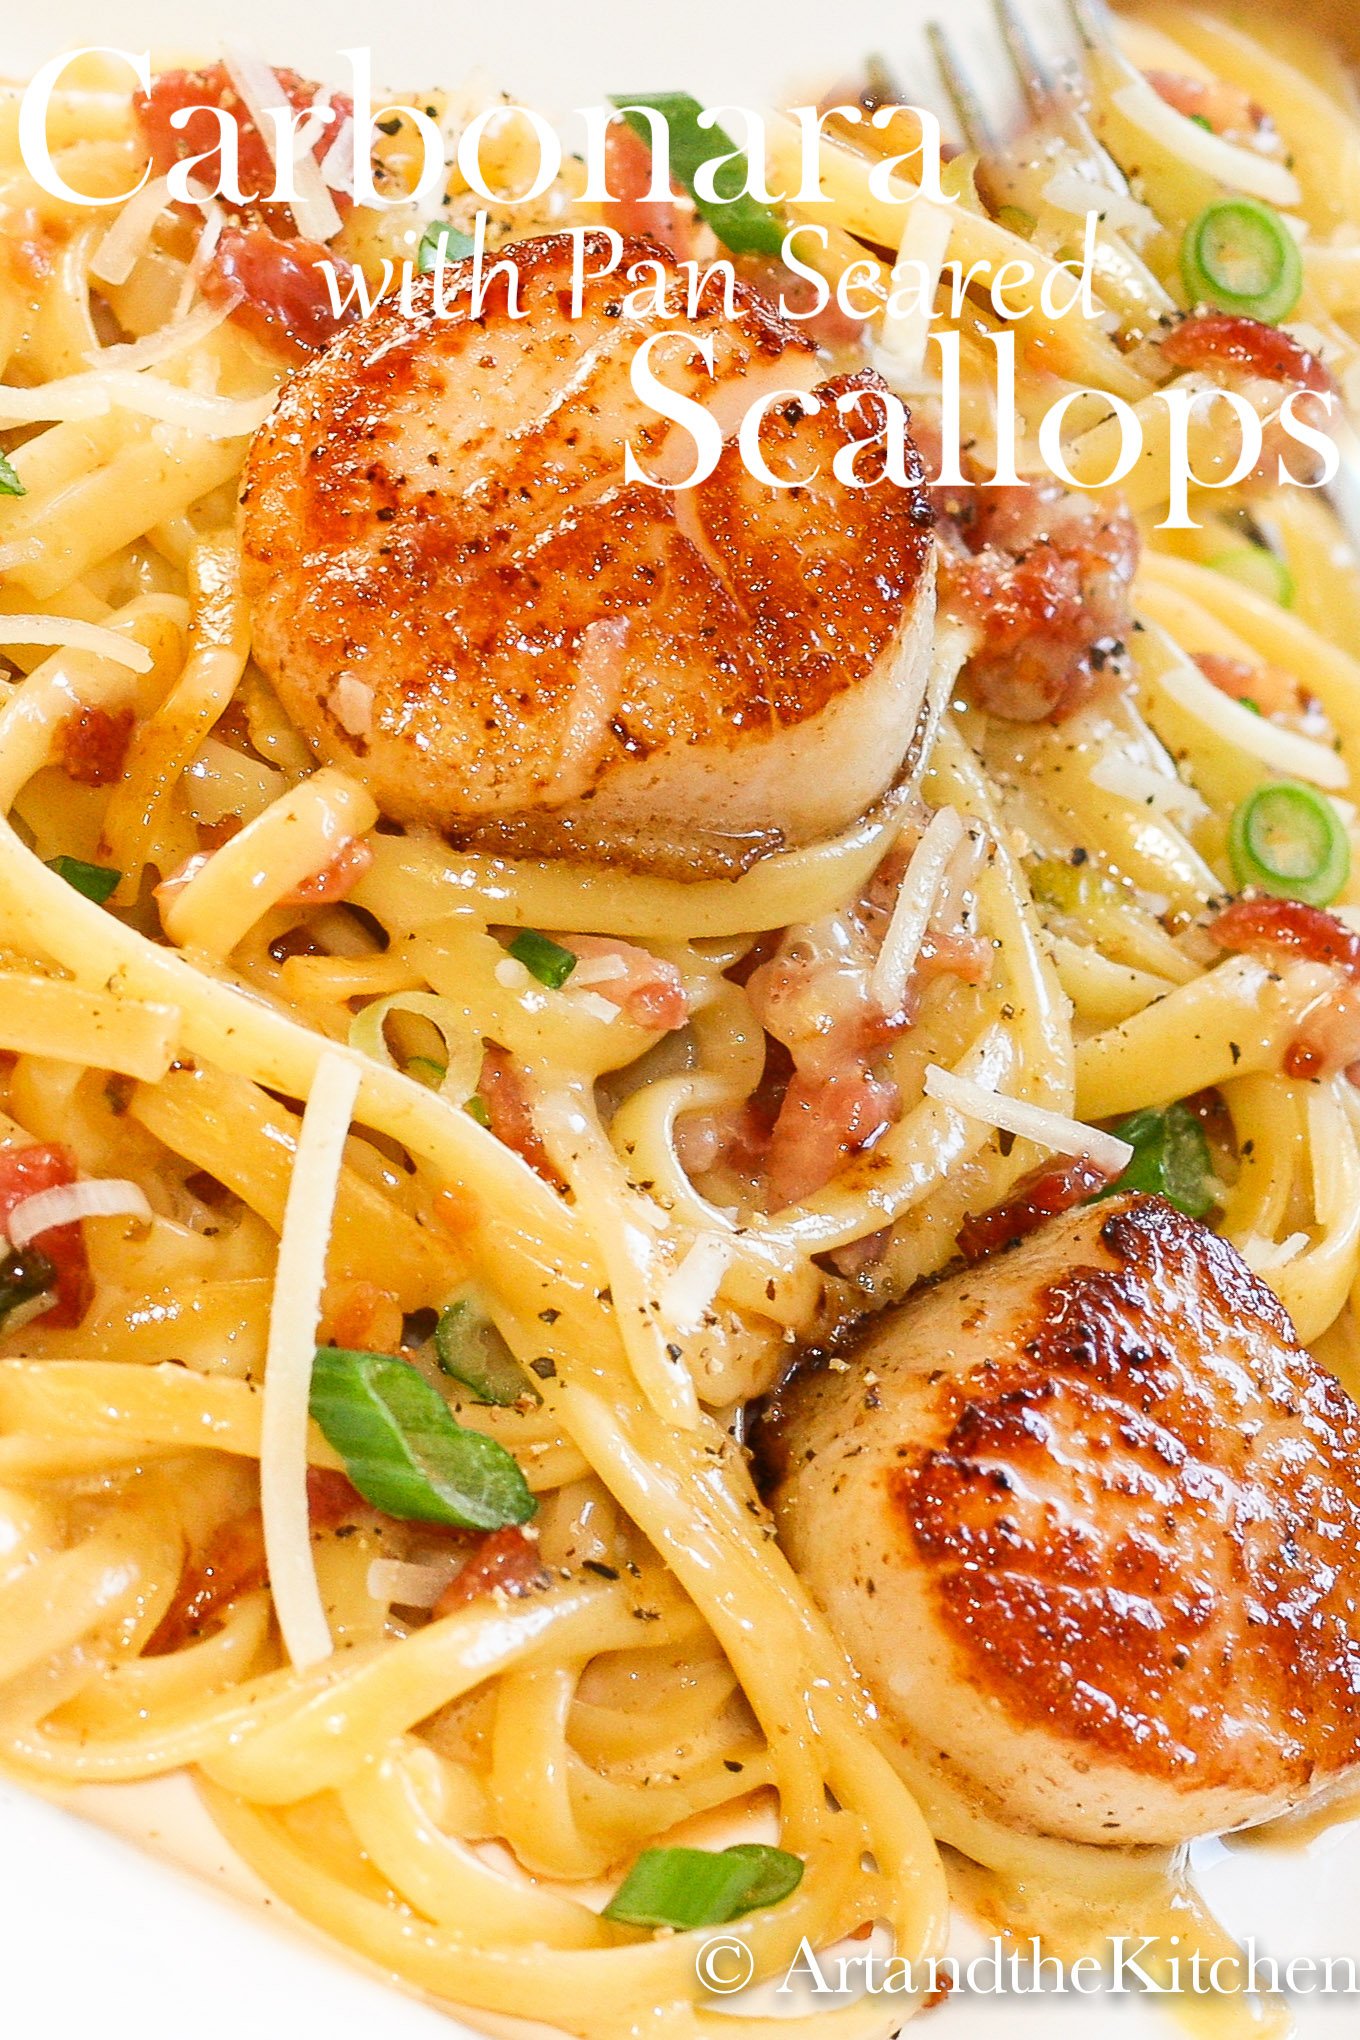 Carbonara with Pan Seared Scallops quick and easy to make. Ready in under 30 minutes with perfectly seared scallops and delicious, creamy carbonara pasta. via @artandthekitch